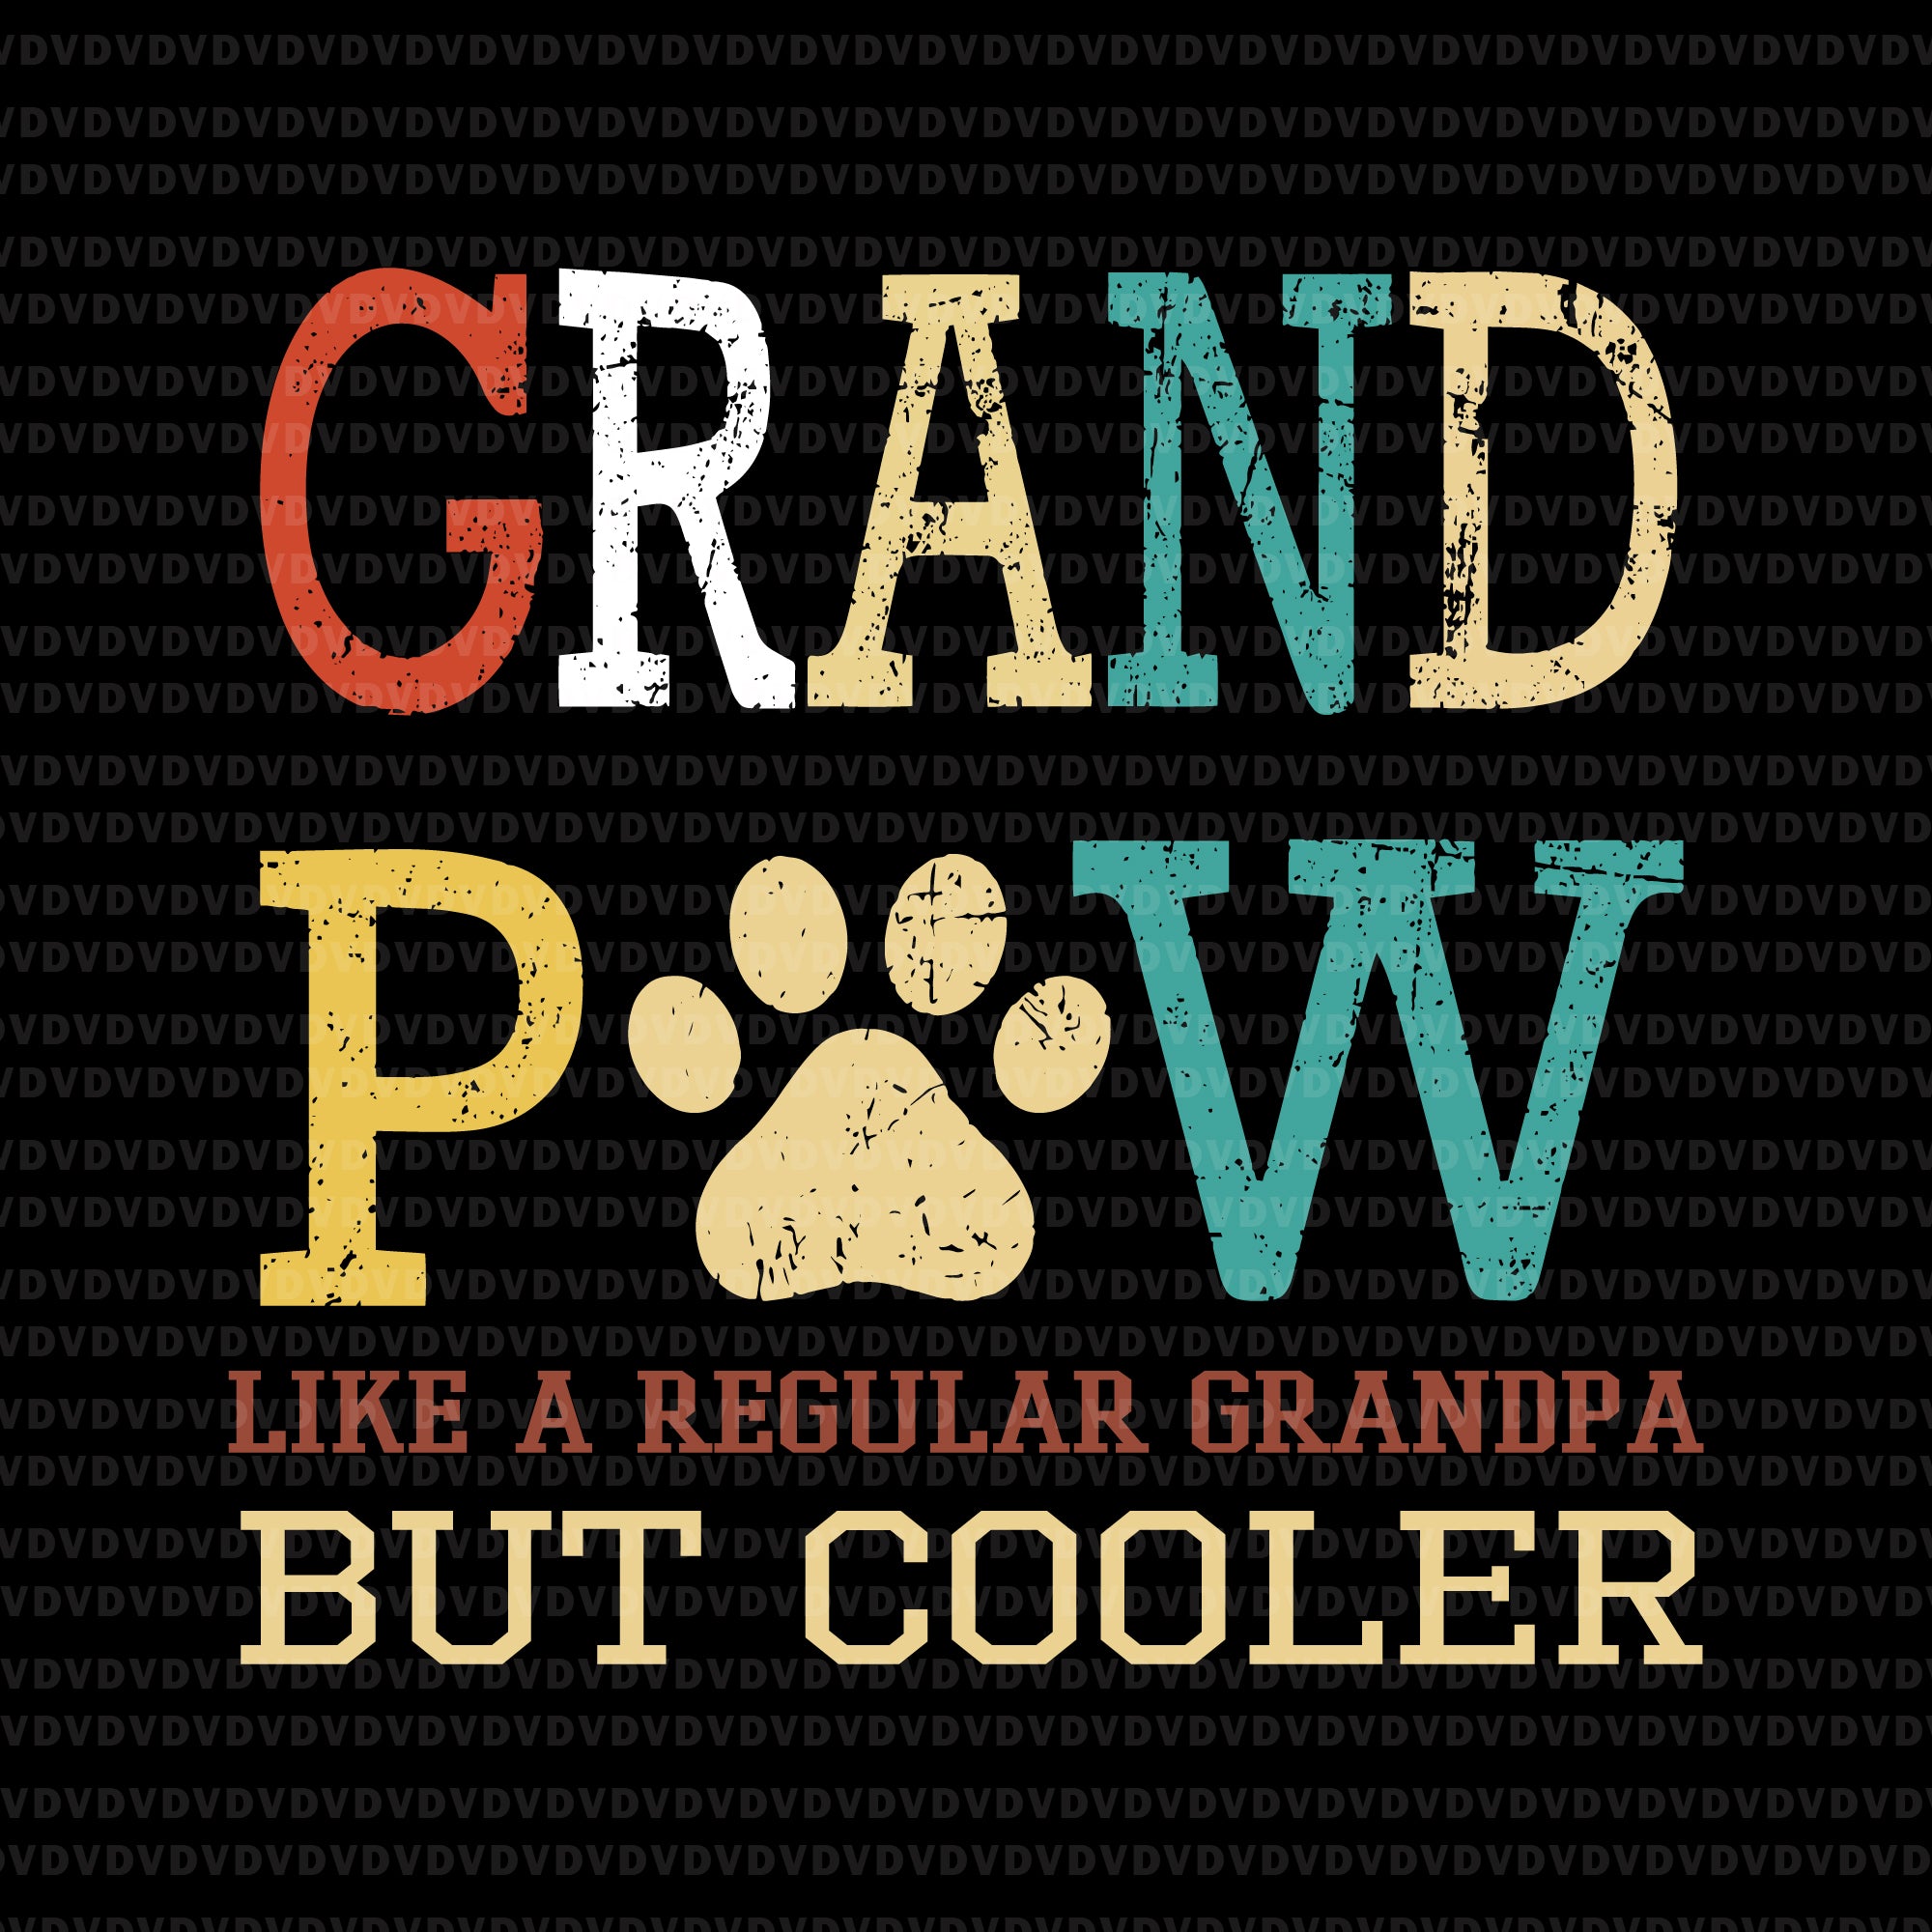 Grand paw svg, Grand paw, Grand paw like a regular grandpa svg, father's day svg, father svg, png, eps, dxf, cut file